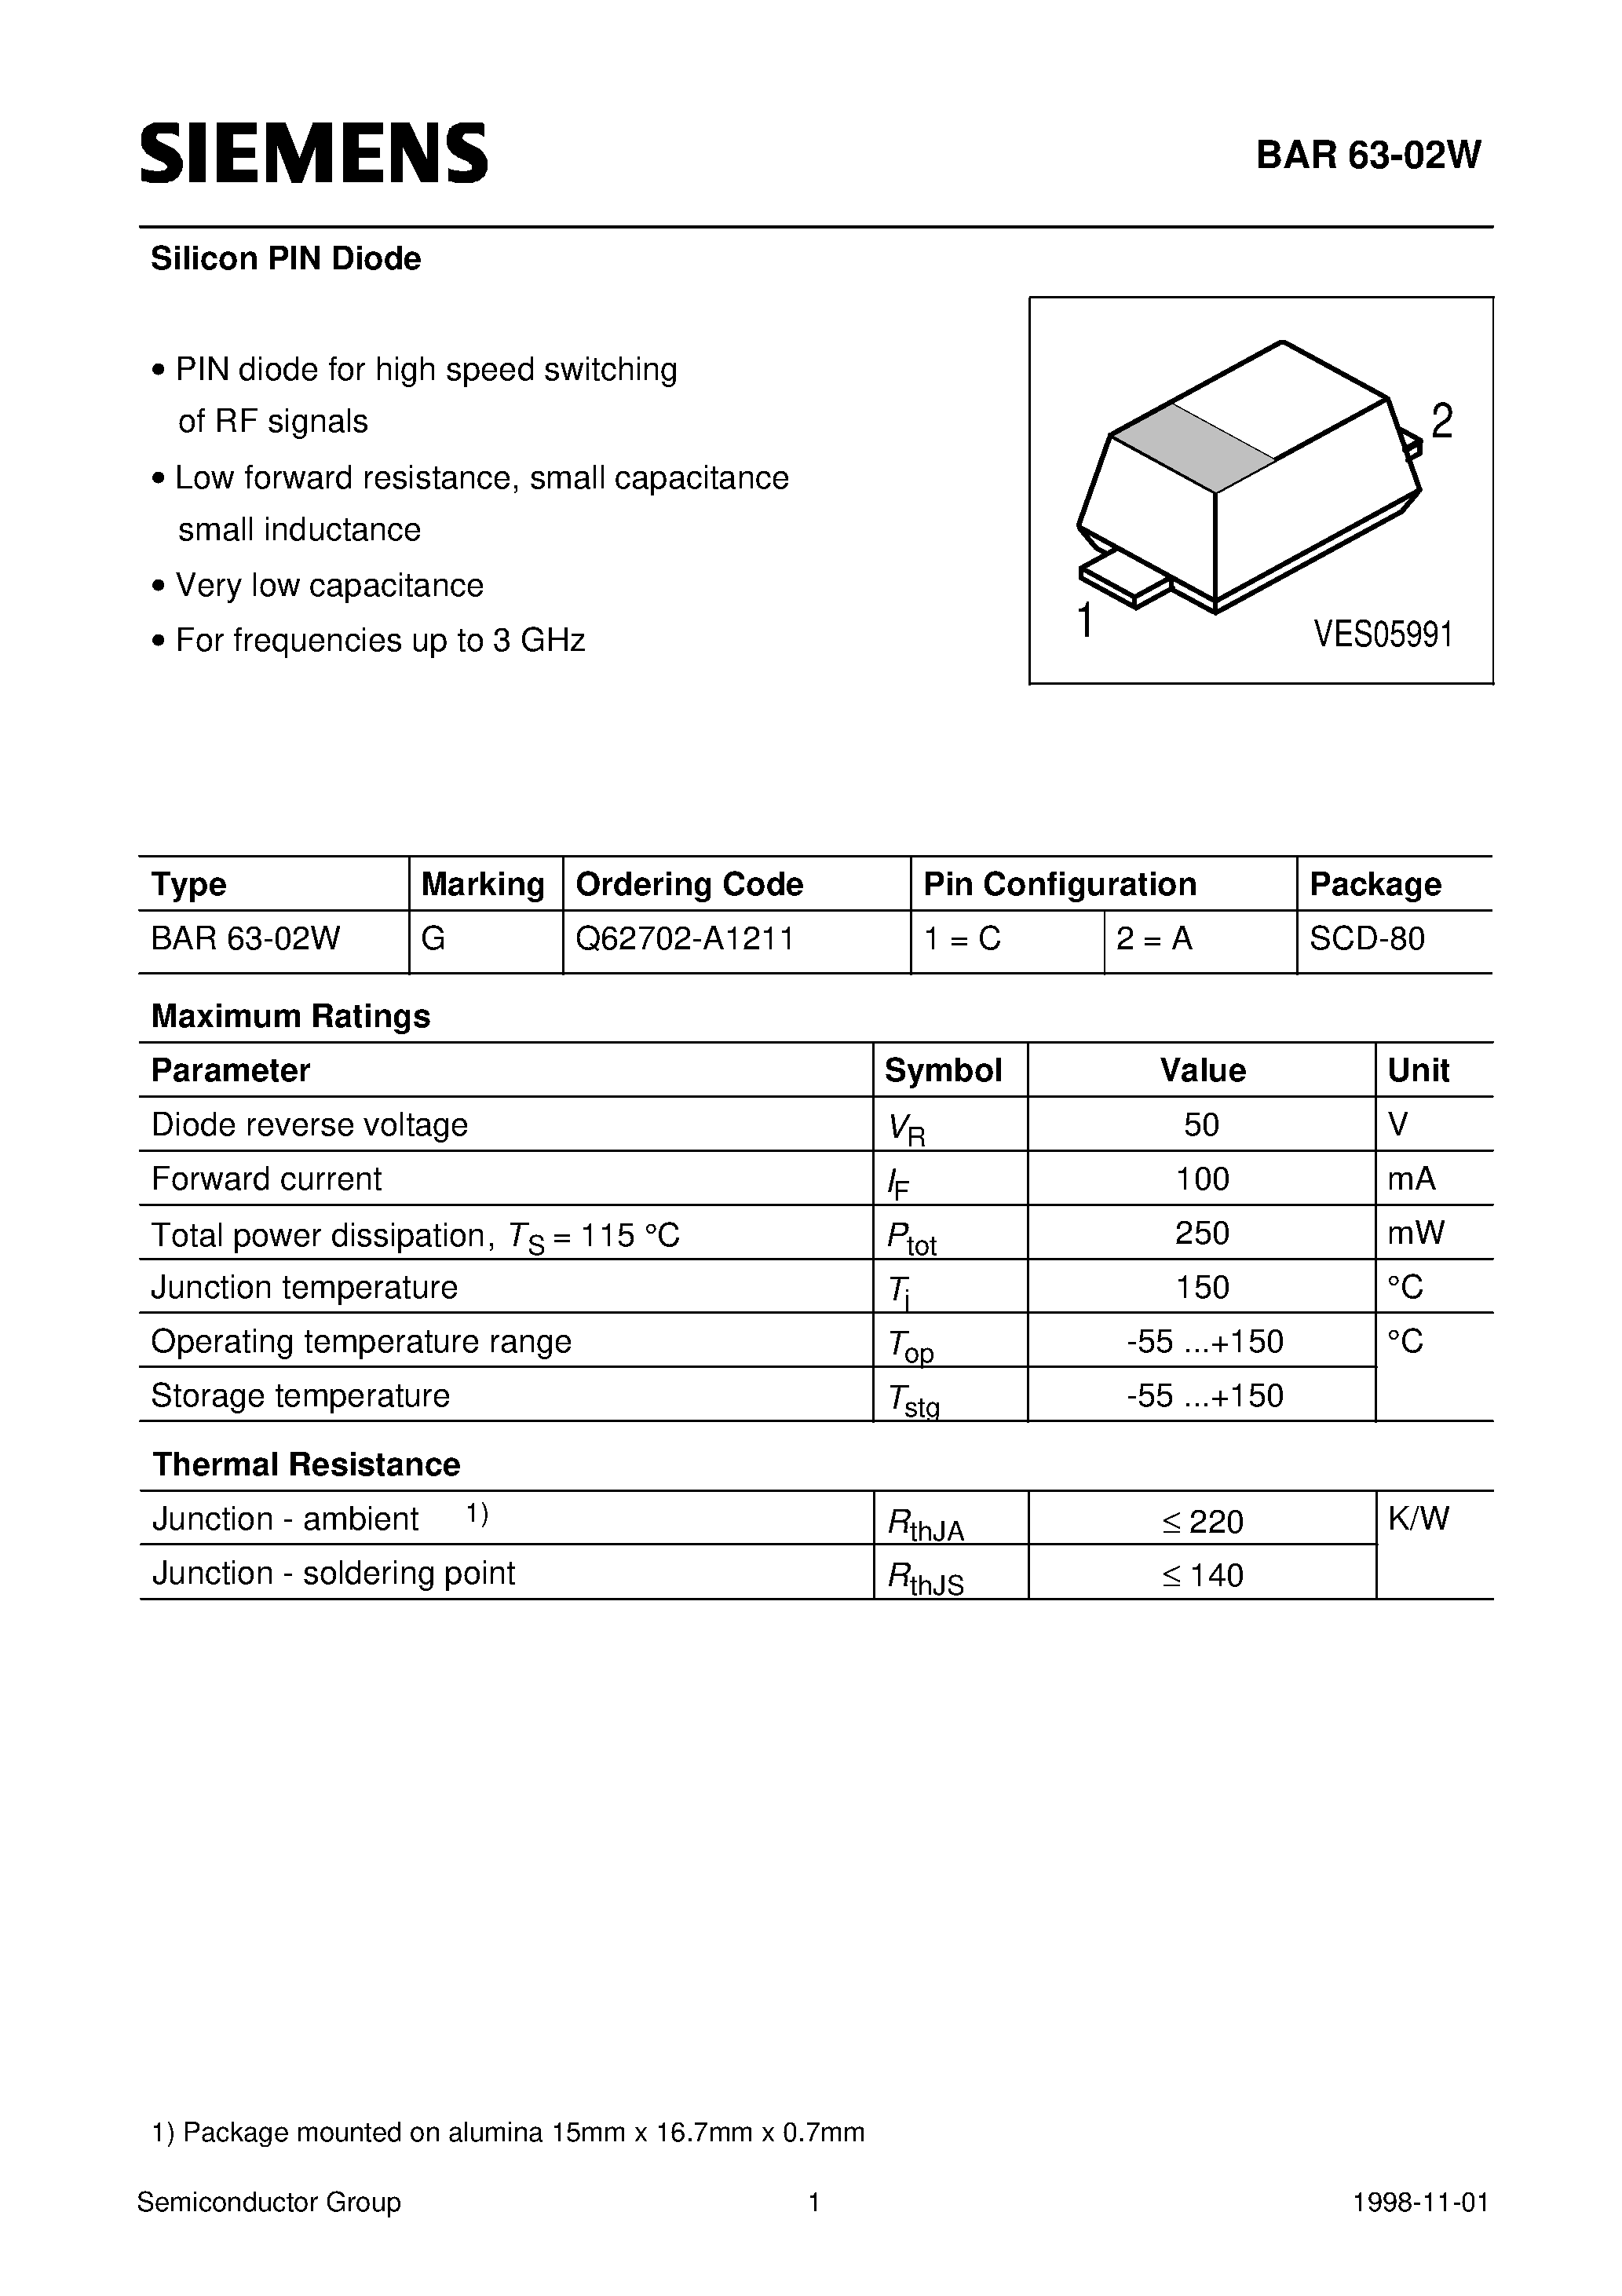 Datasheet BAR63-02W - Silicon PIN Diode (PIN diode for high speed switching of RF signals/ Low forward resistance/ small capacitance small inductance) page 1